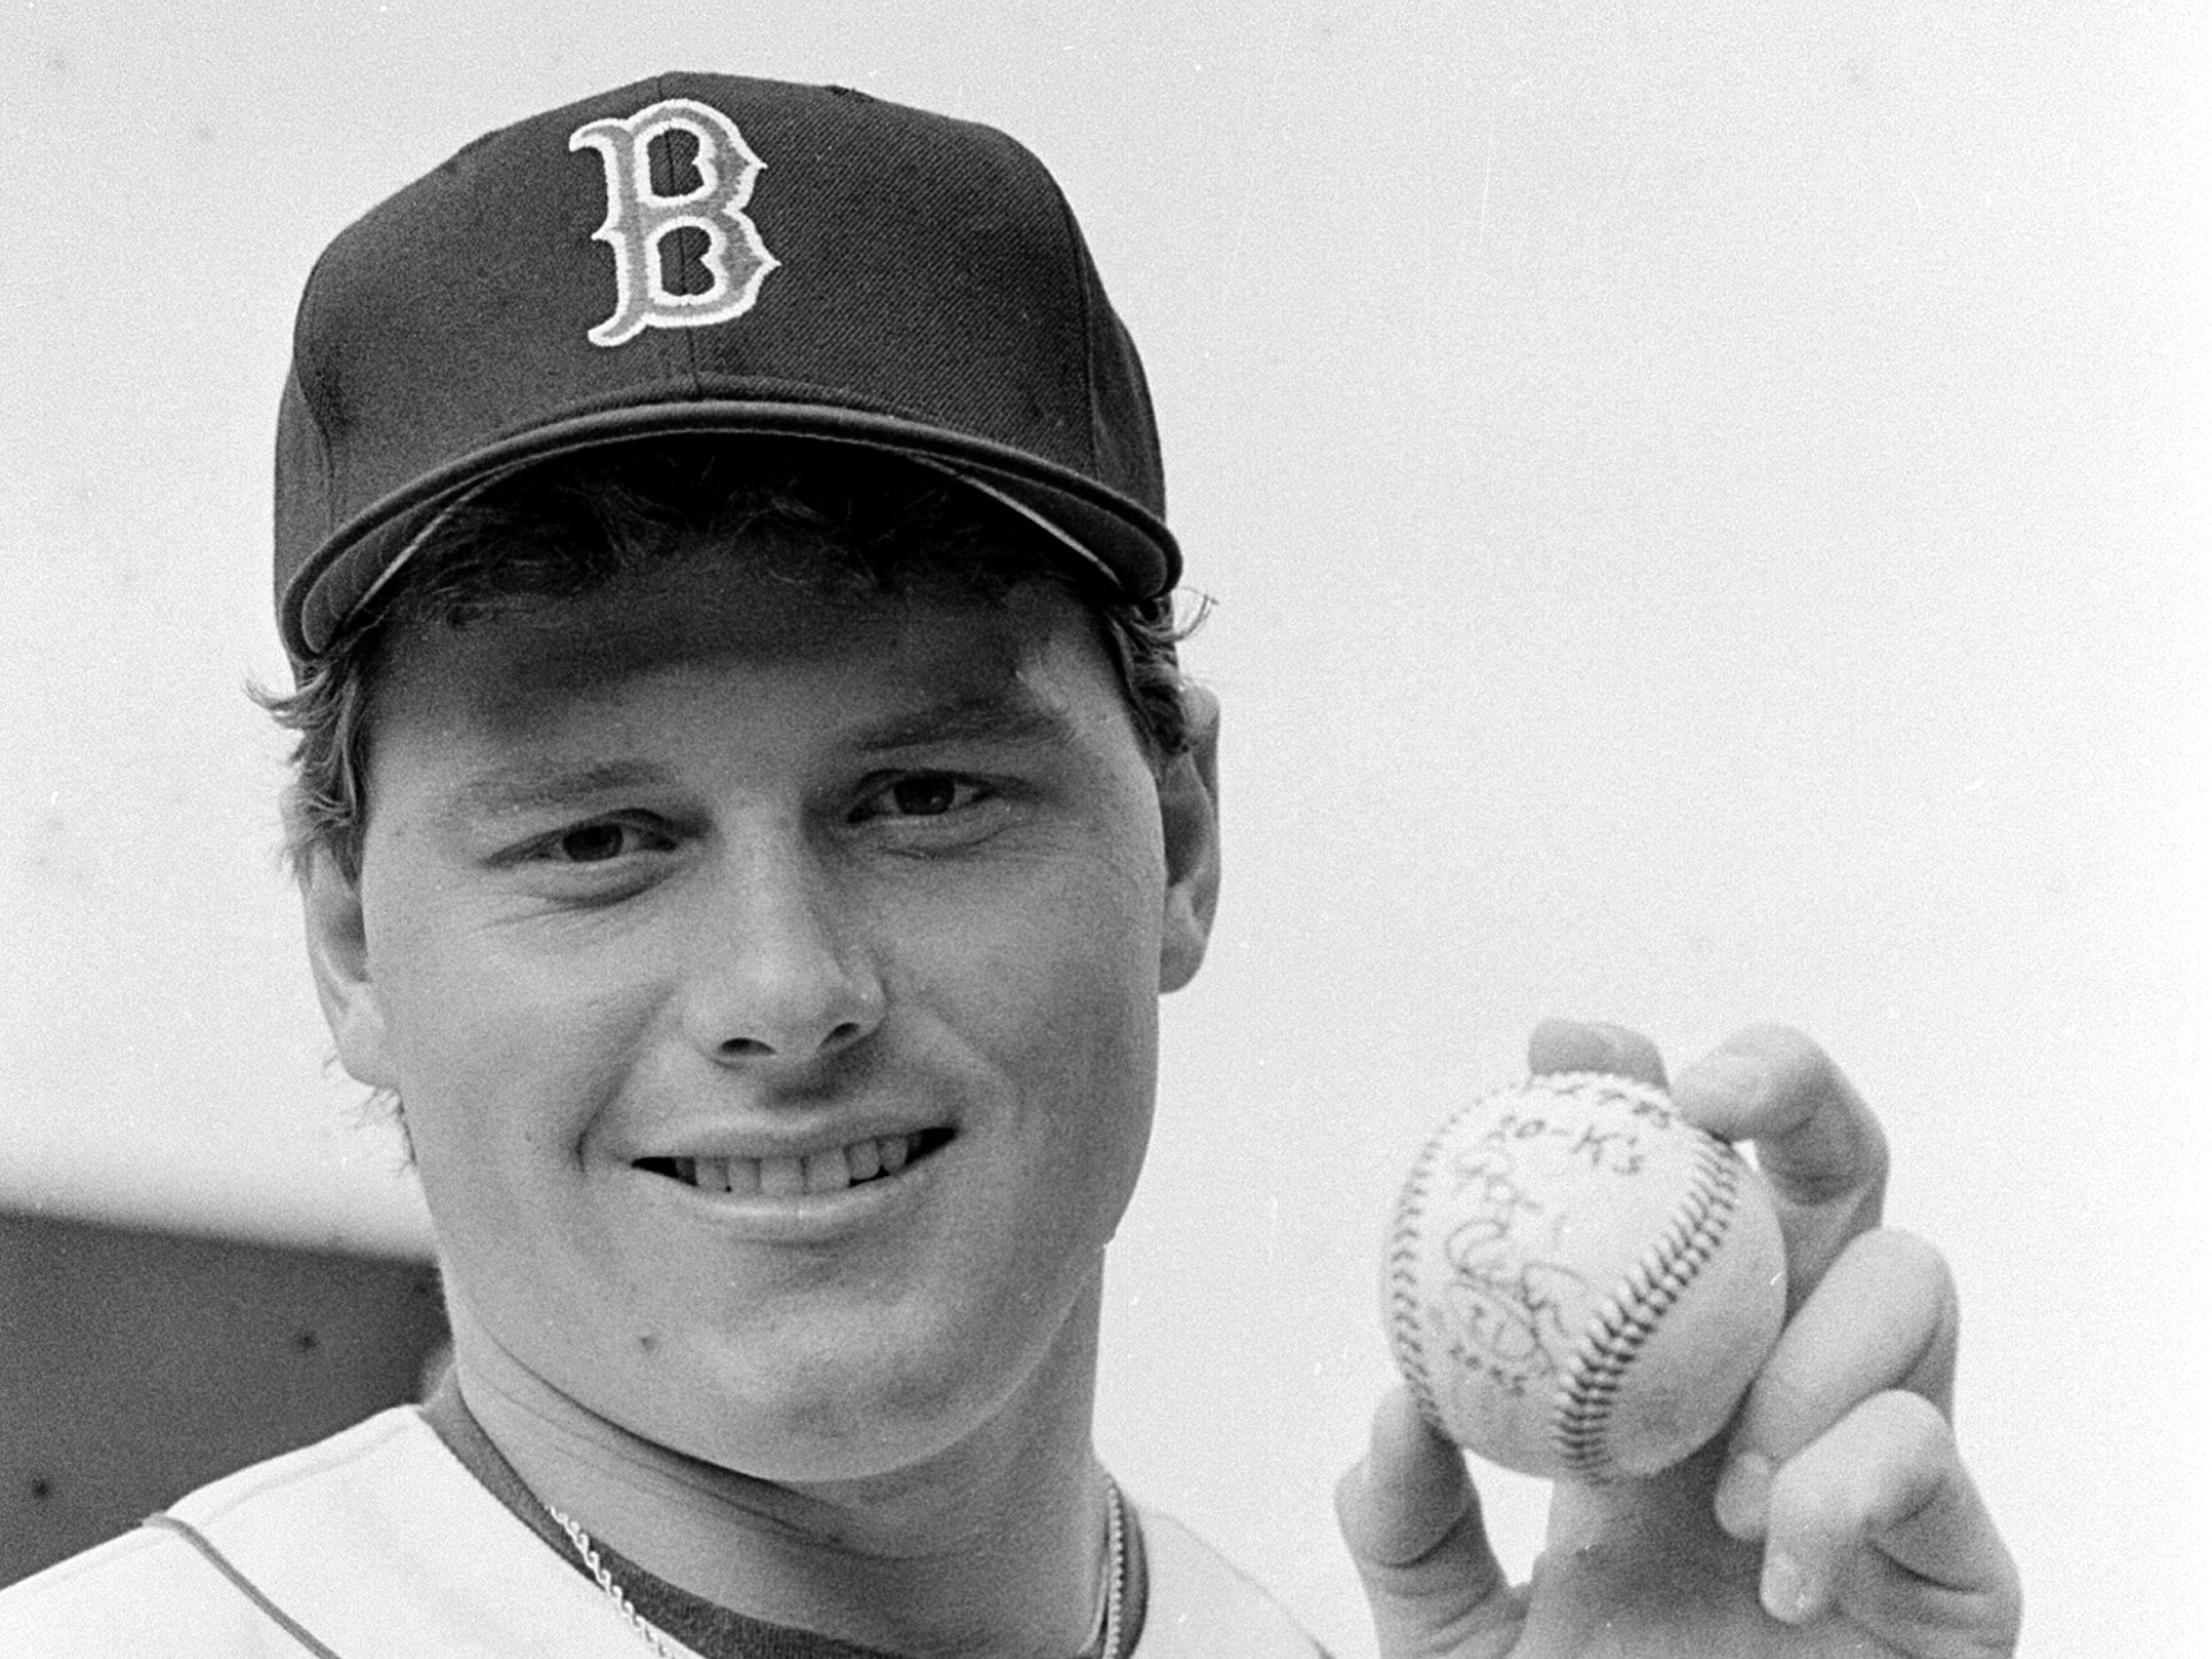 Roger Clemens Struckout 20 Seattle Mariners On This Date, April 29, 1986